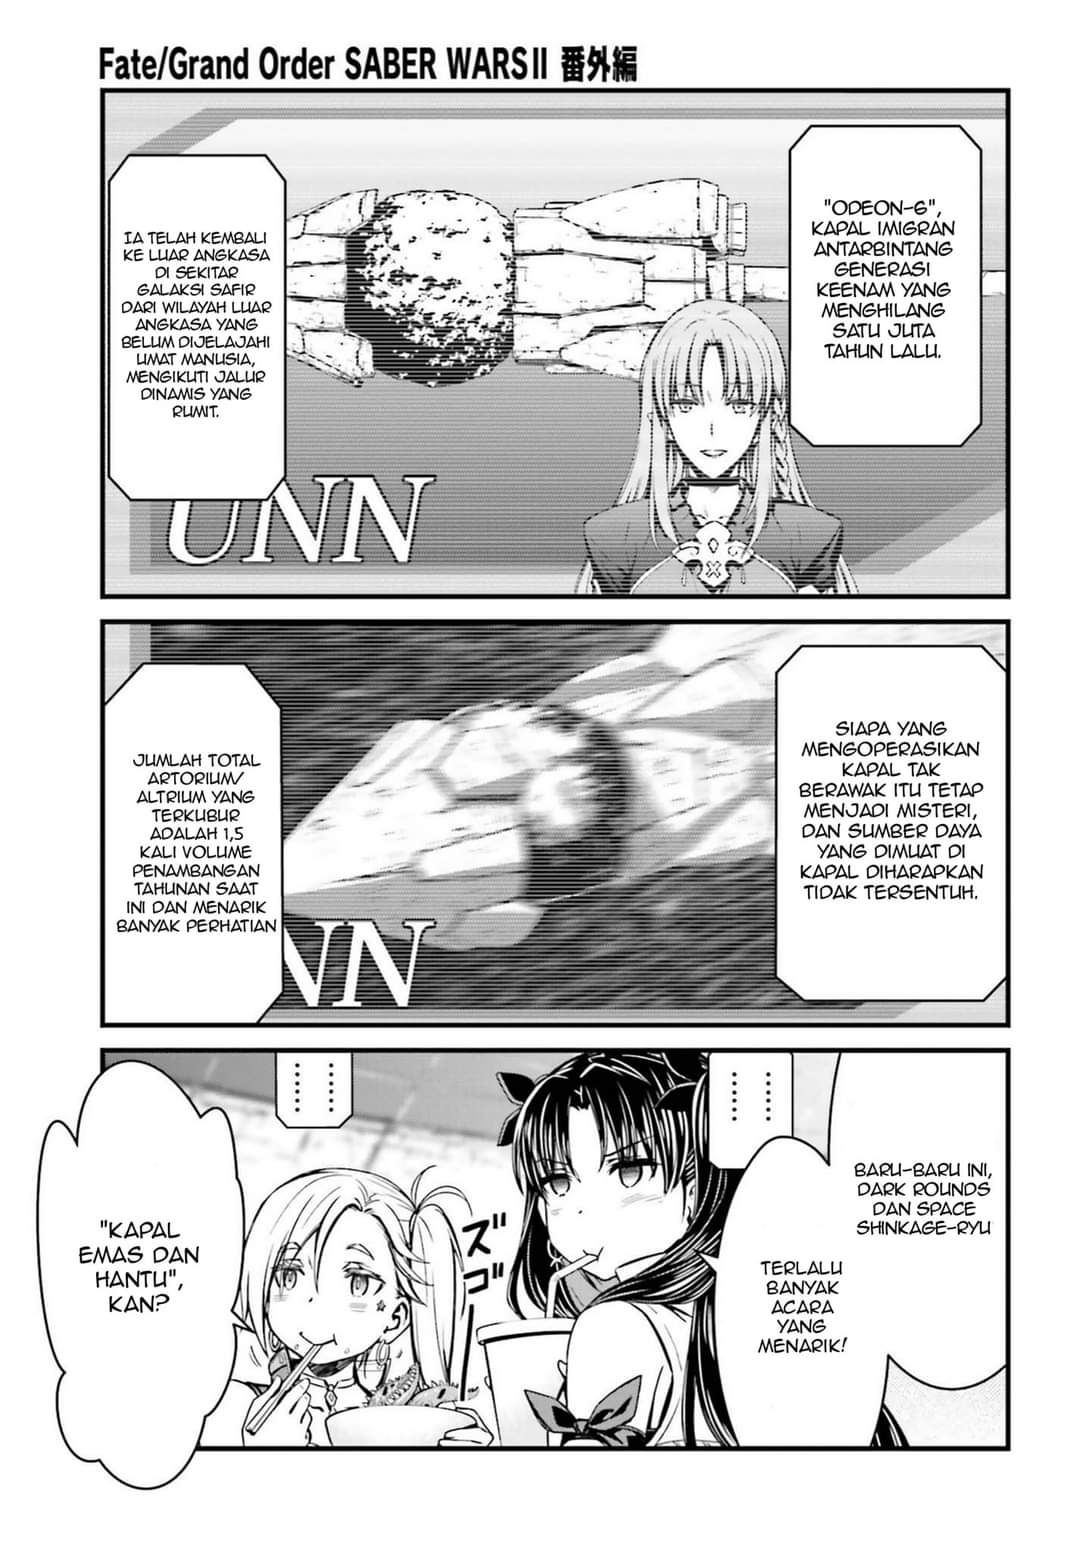 Fate/Grand Order SABER WARS II Extra Edition: Jane & Ishtar ~ Shooting Star of 1 Million Light Years ~ Chapter 1 bahasa Indonesia Gambar 11